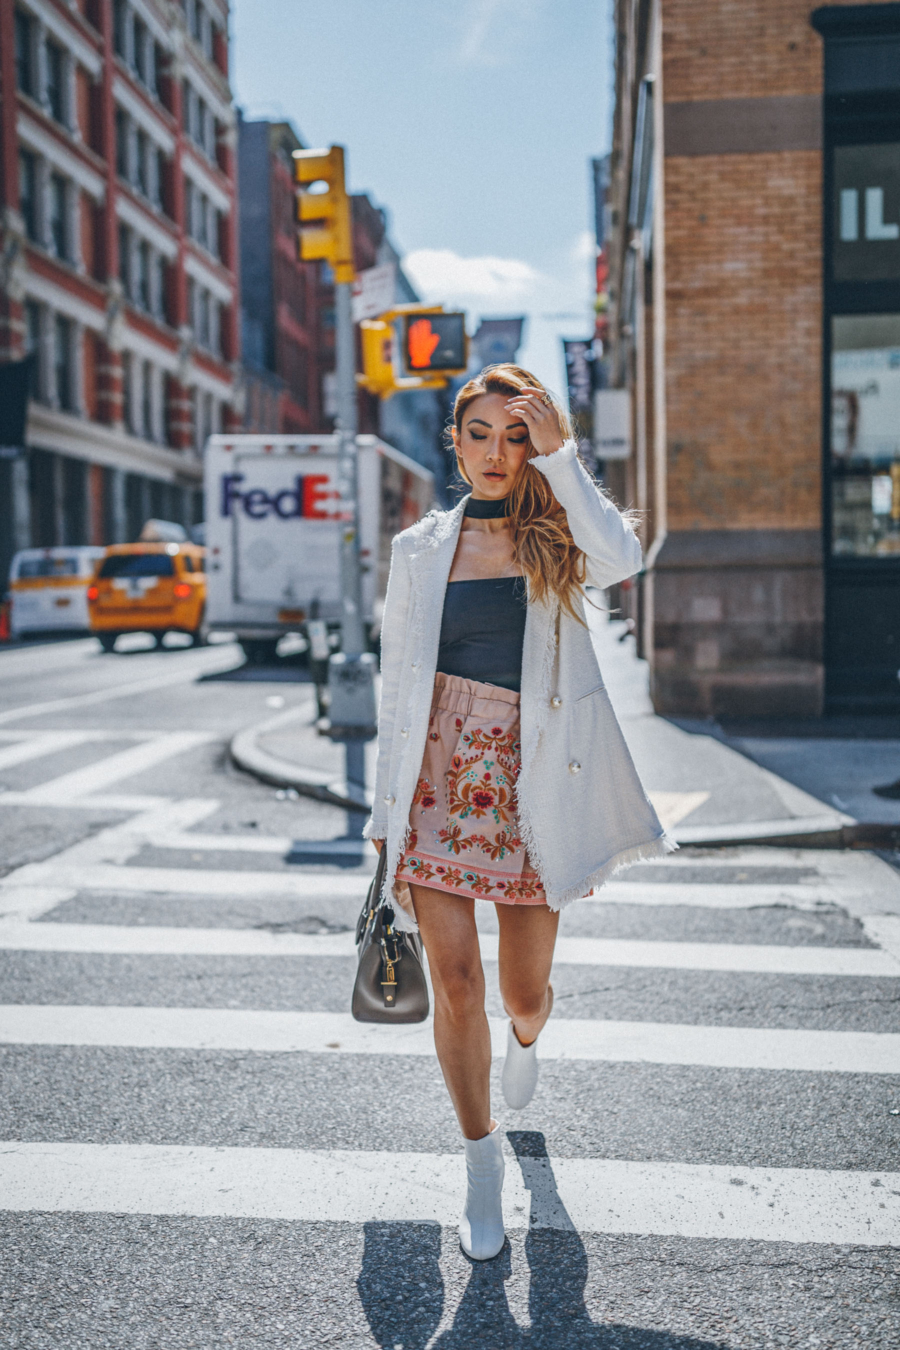 3 Foolproof Ideas for an Engaging Blog Post - Embroidered skirt, white boots, tweed jacket // Notjessfashion.com